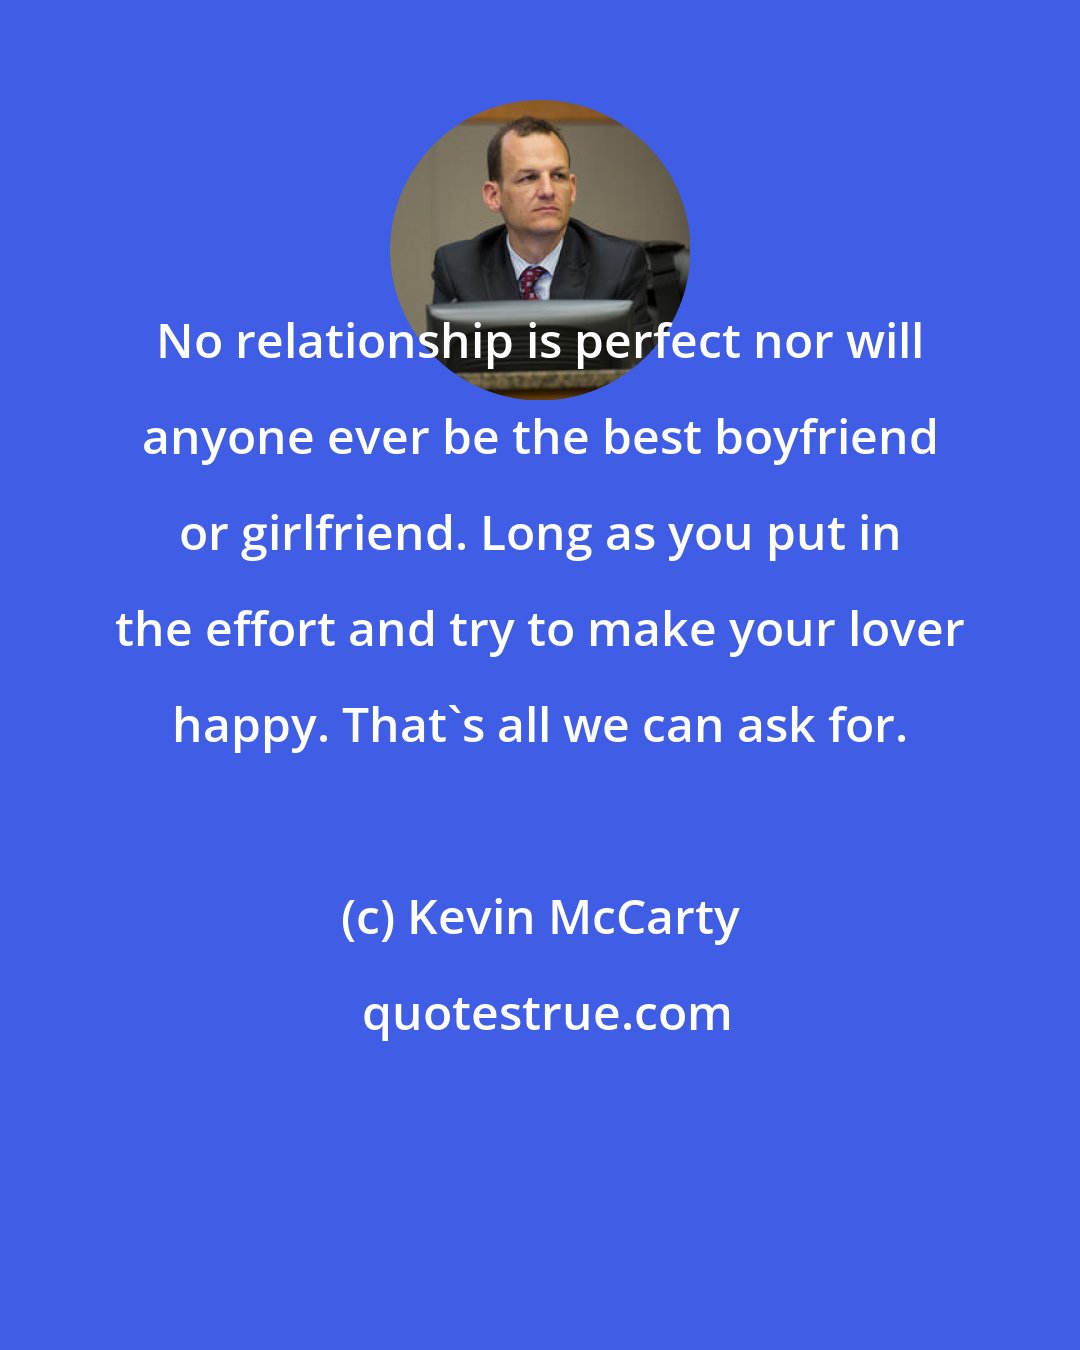 Kevin McCarty: No relationship is perfect nor will anyone ever be the best boyfriend or girlfriend. Long as you put in the effort and try to make your lover happy. That's all we can ask for.